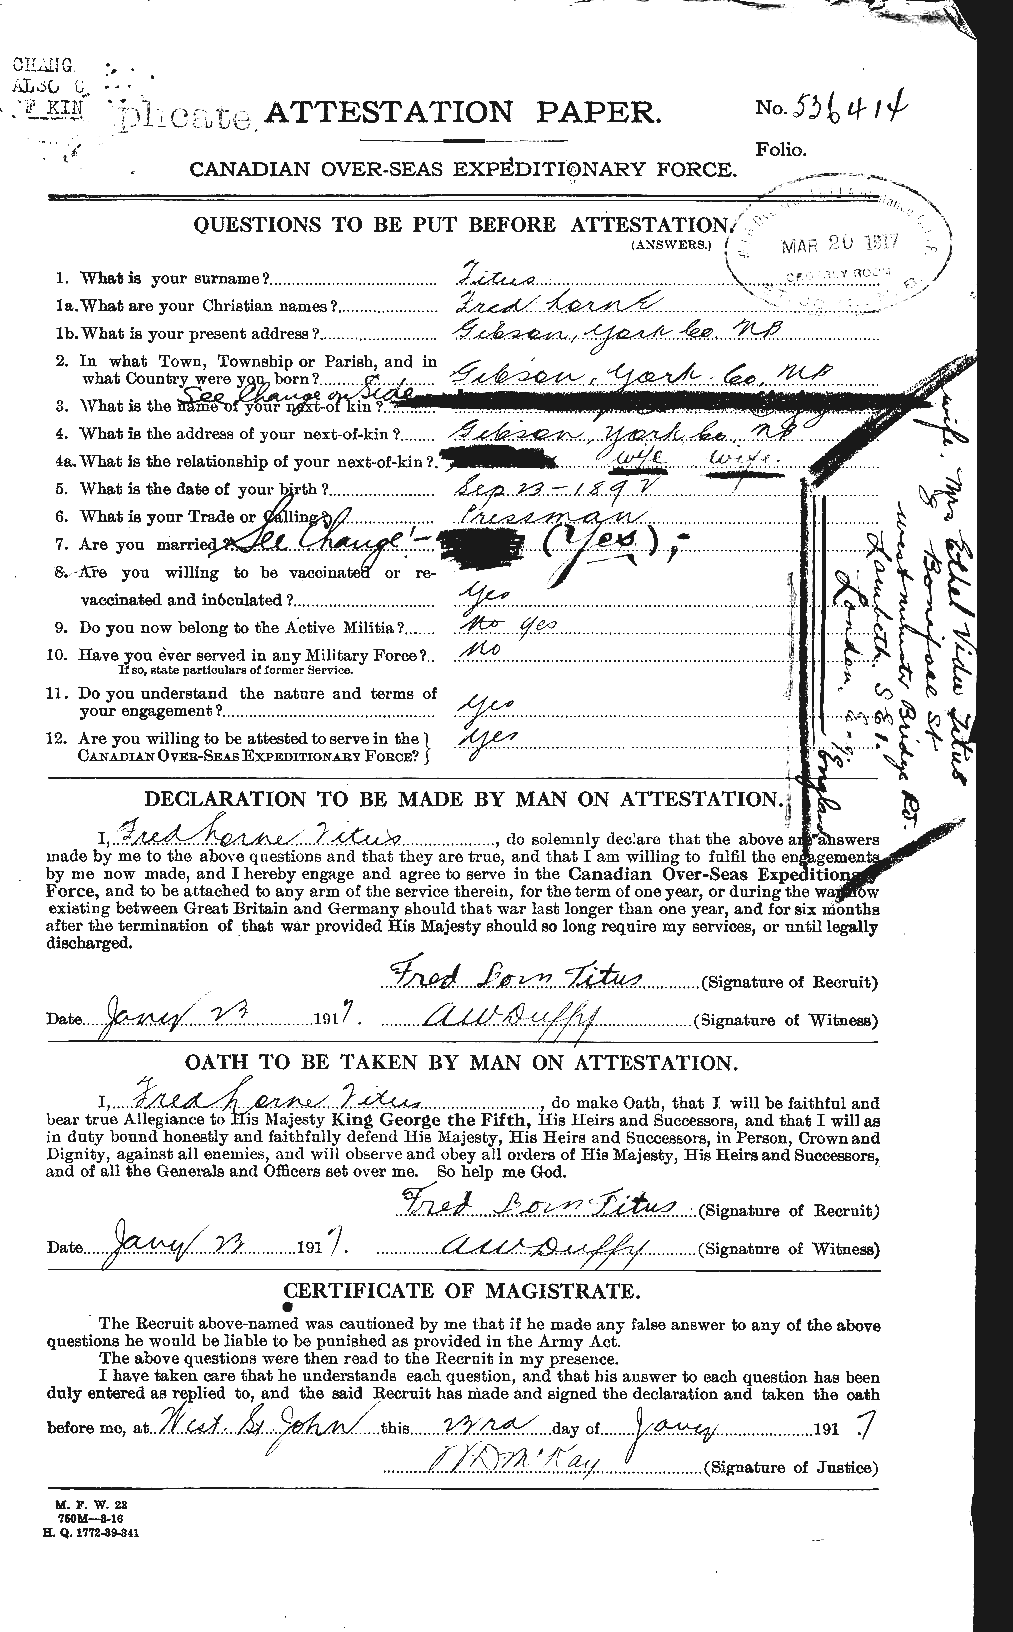 Personnel Records of the First World War - CEF 634960a